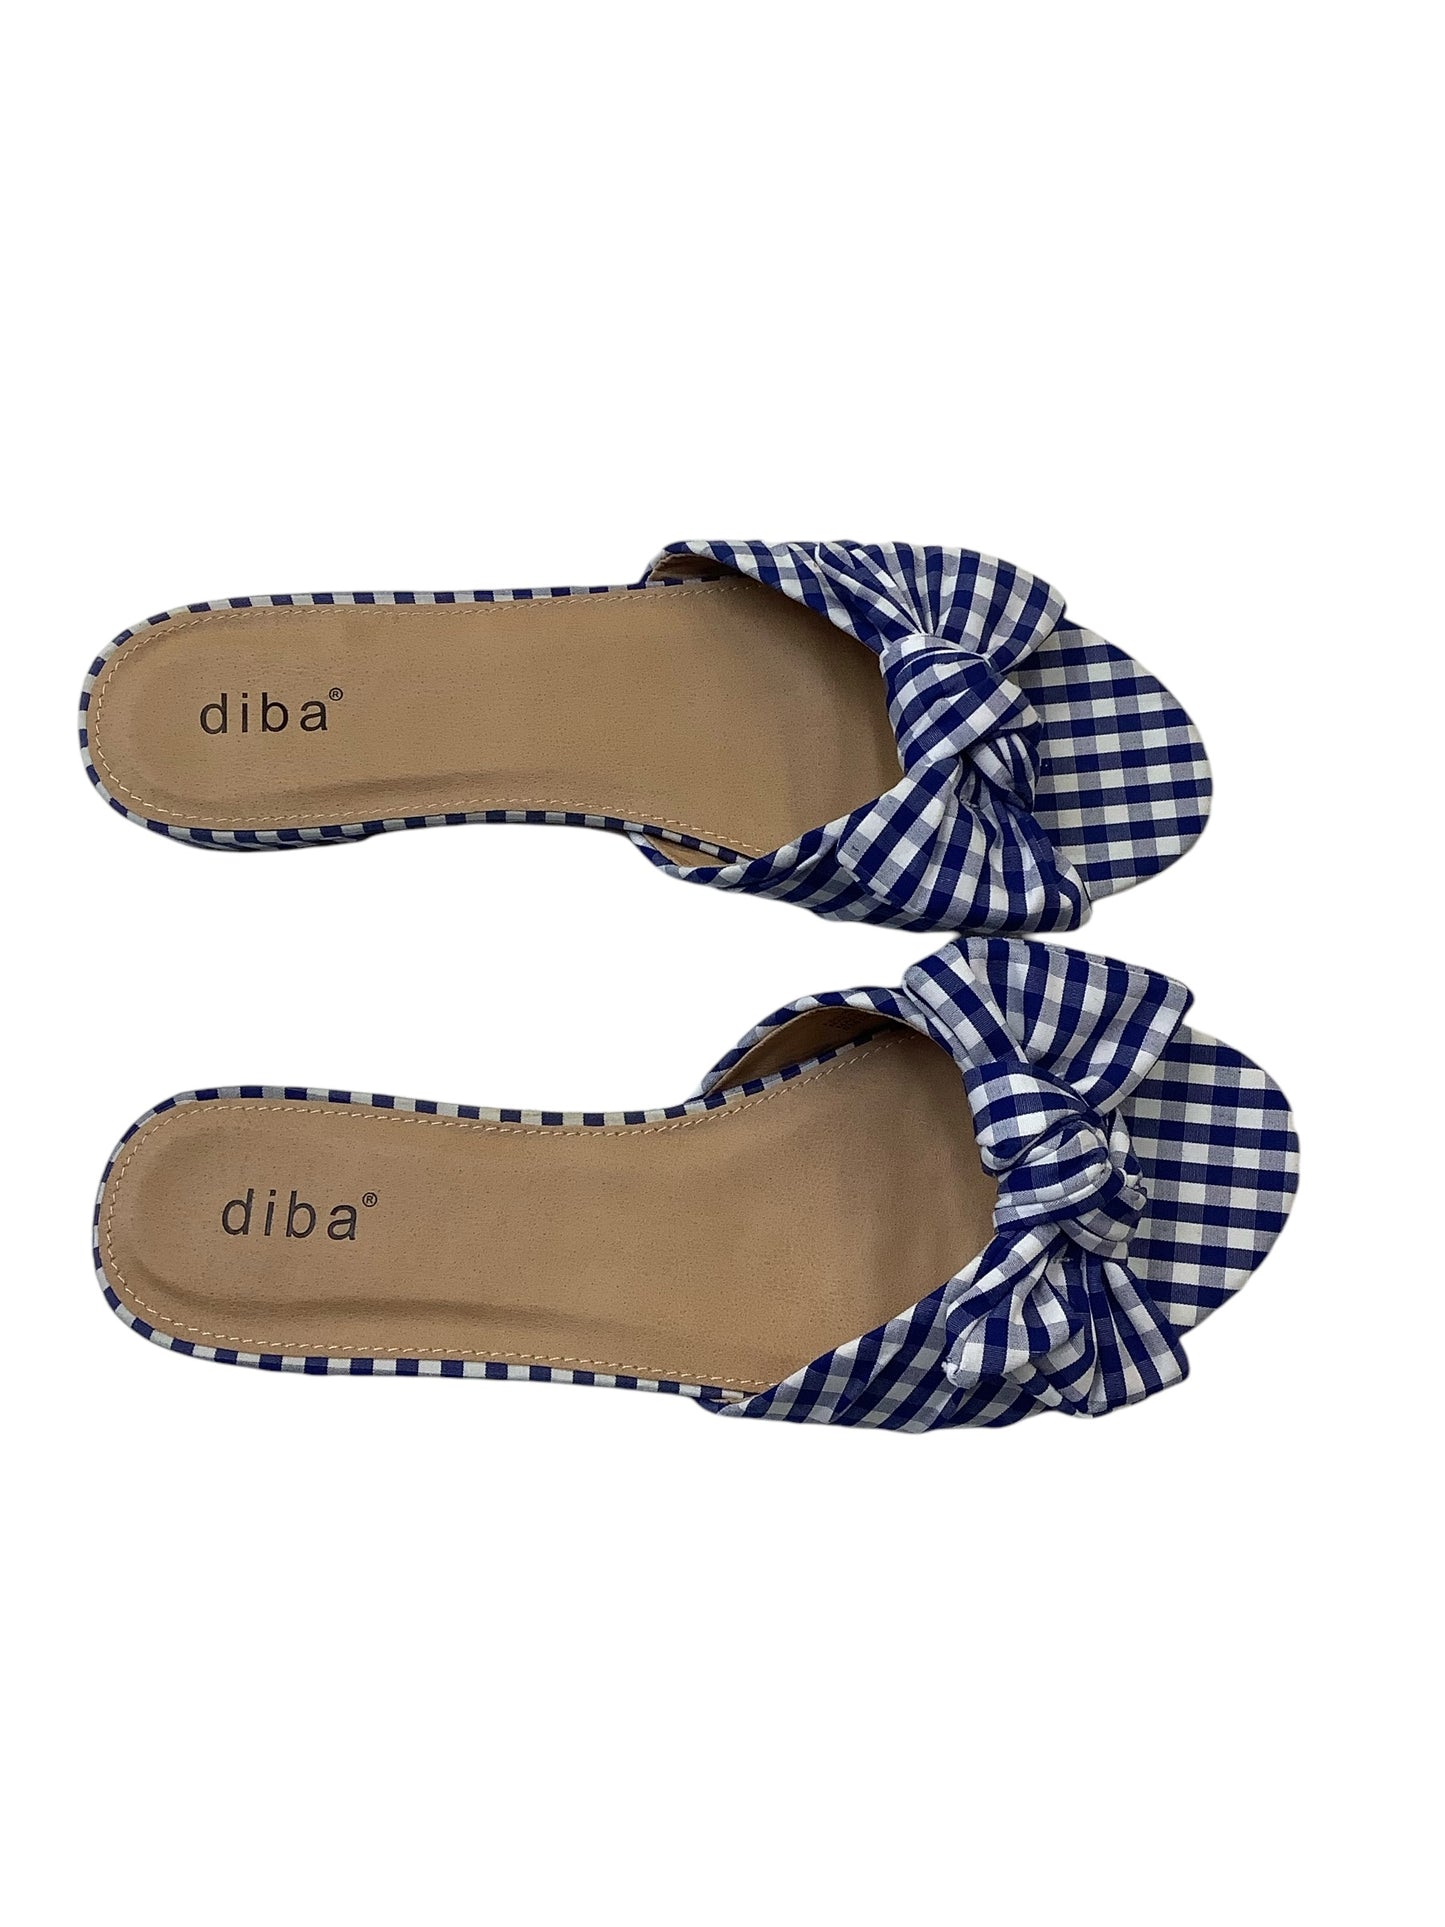 Sandals Flats By Diba  Size: 9.5